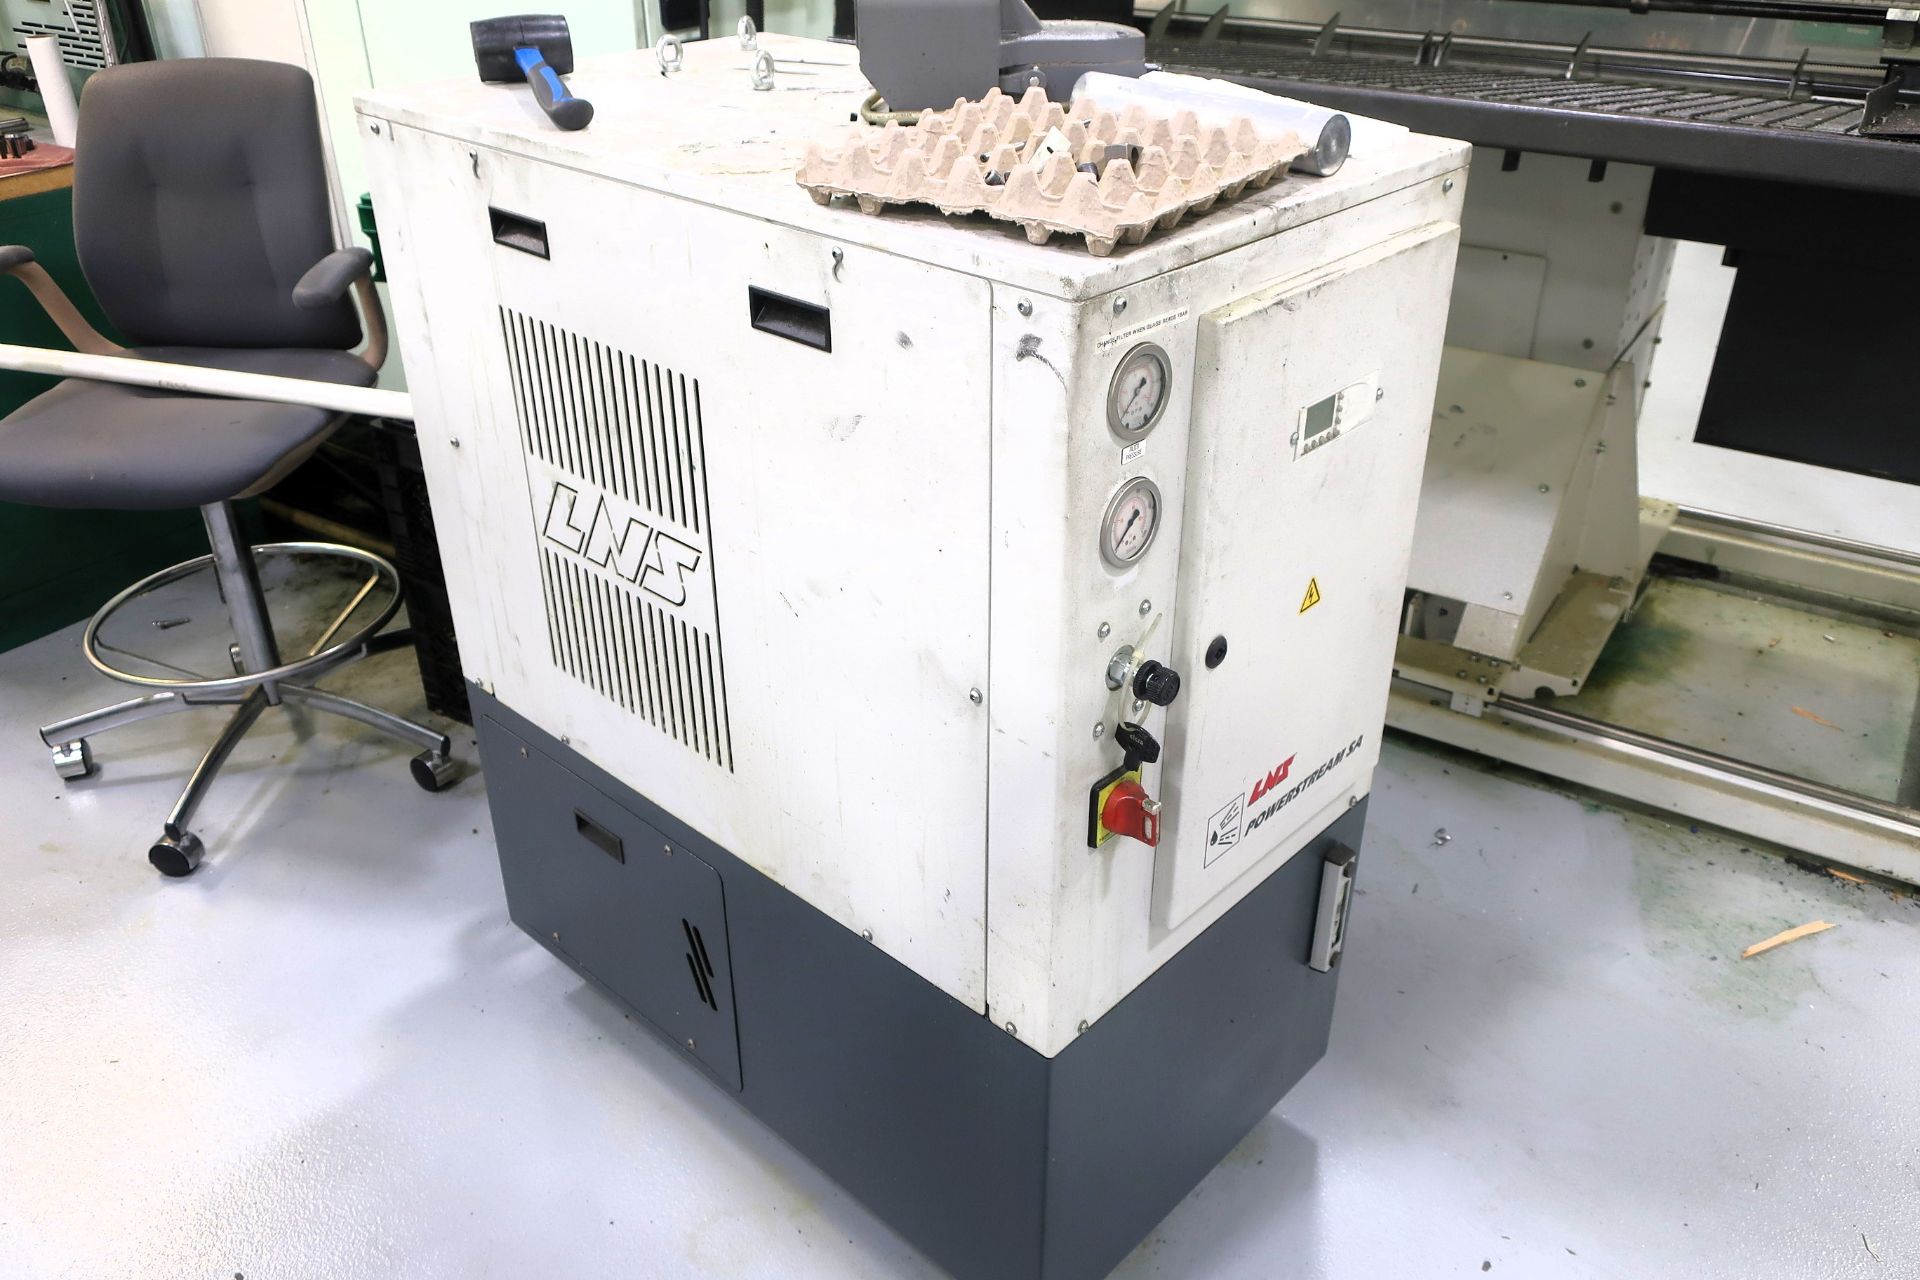 EUROTECH B465 Y2 QUATROFLEX TWIN SPINDLE TWIN TURRET CNC LATHE W/DUAL Y-AXIS, NEW 2011, SN 11045 - Image 15 of 19